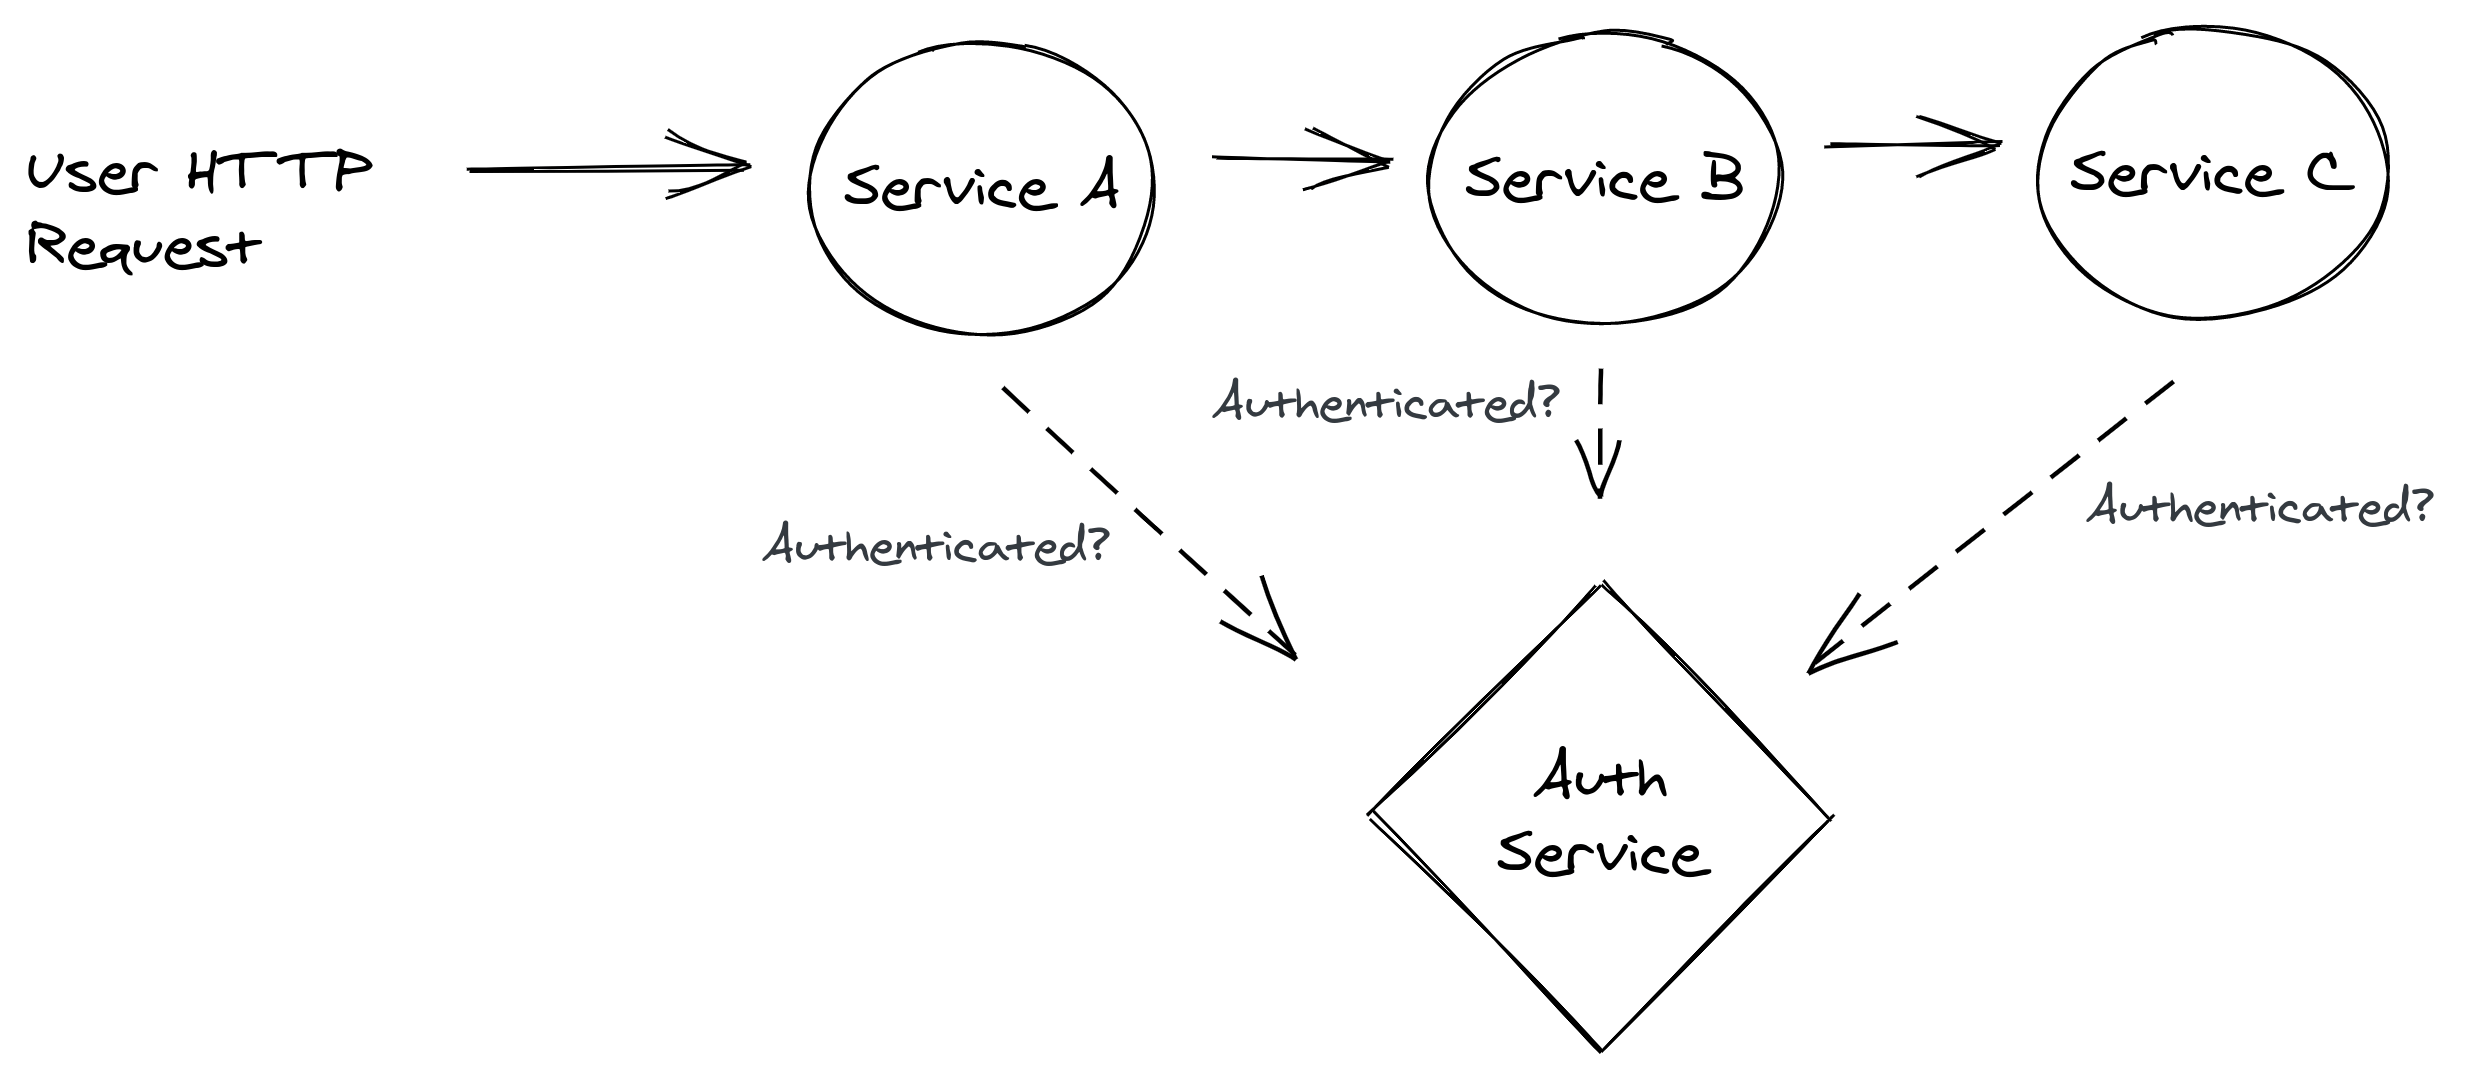 Auth microservice used by other services